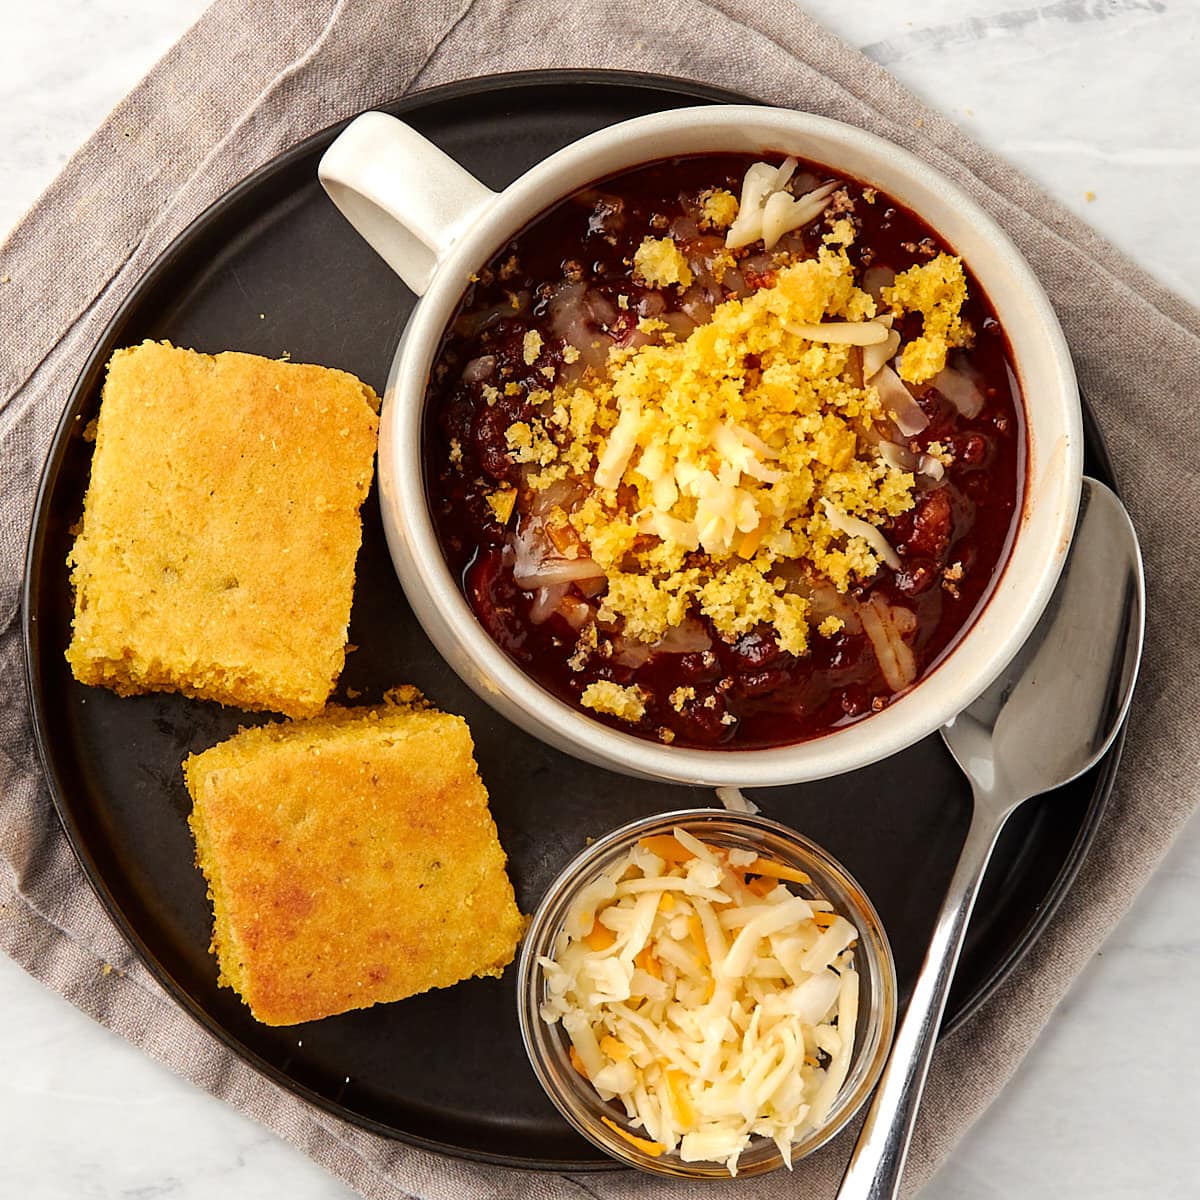 cornbread served with chili. chili topped with cheese and cornbread crumbles.